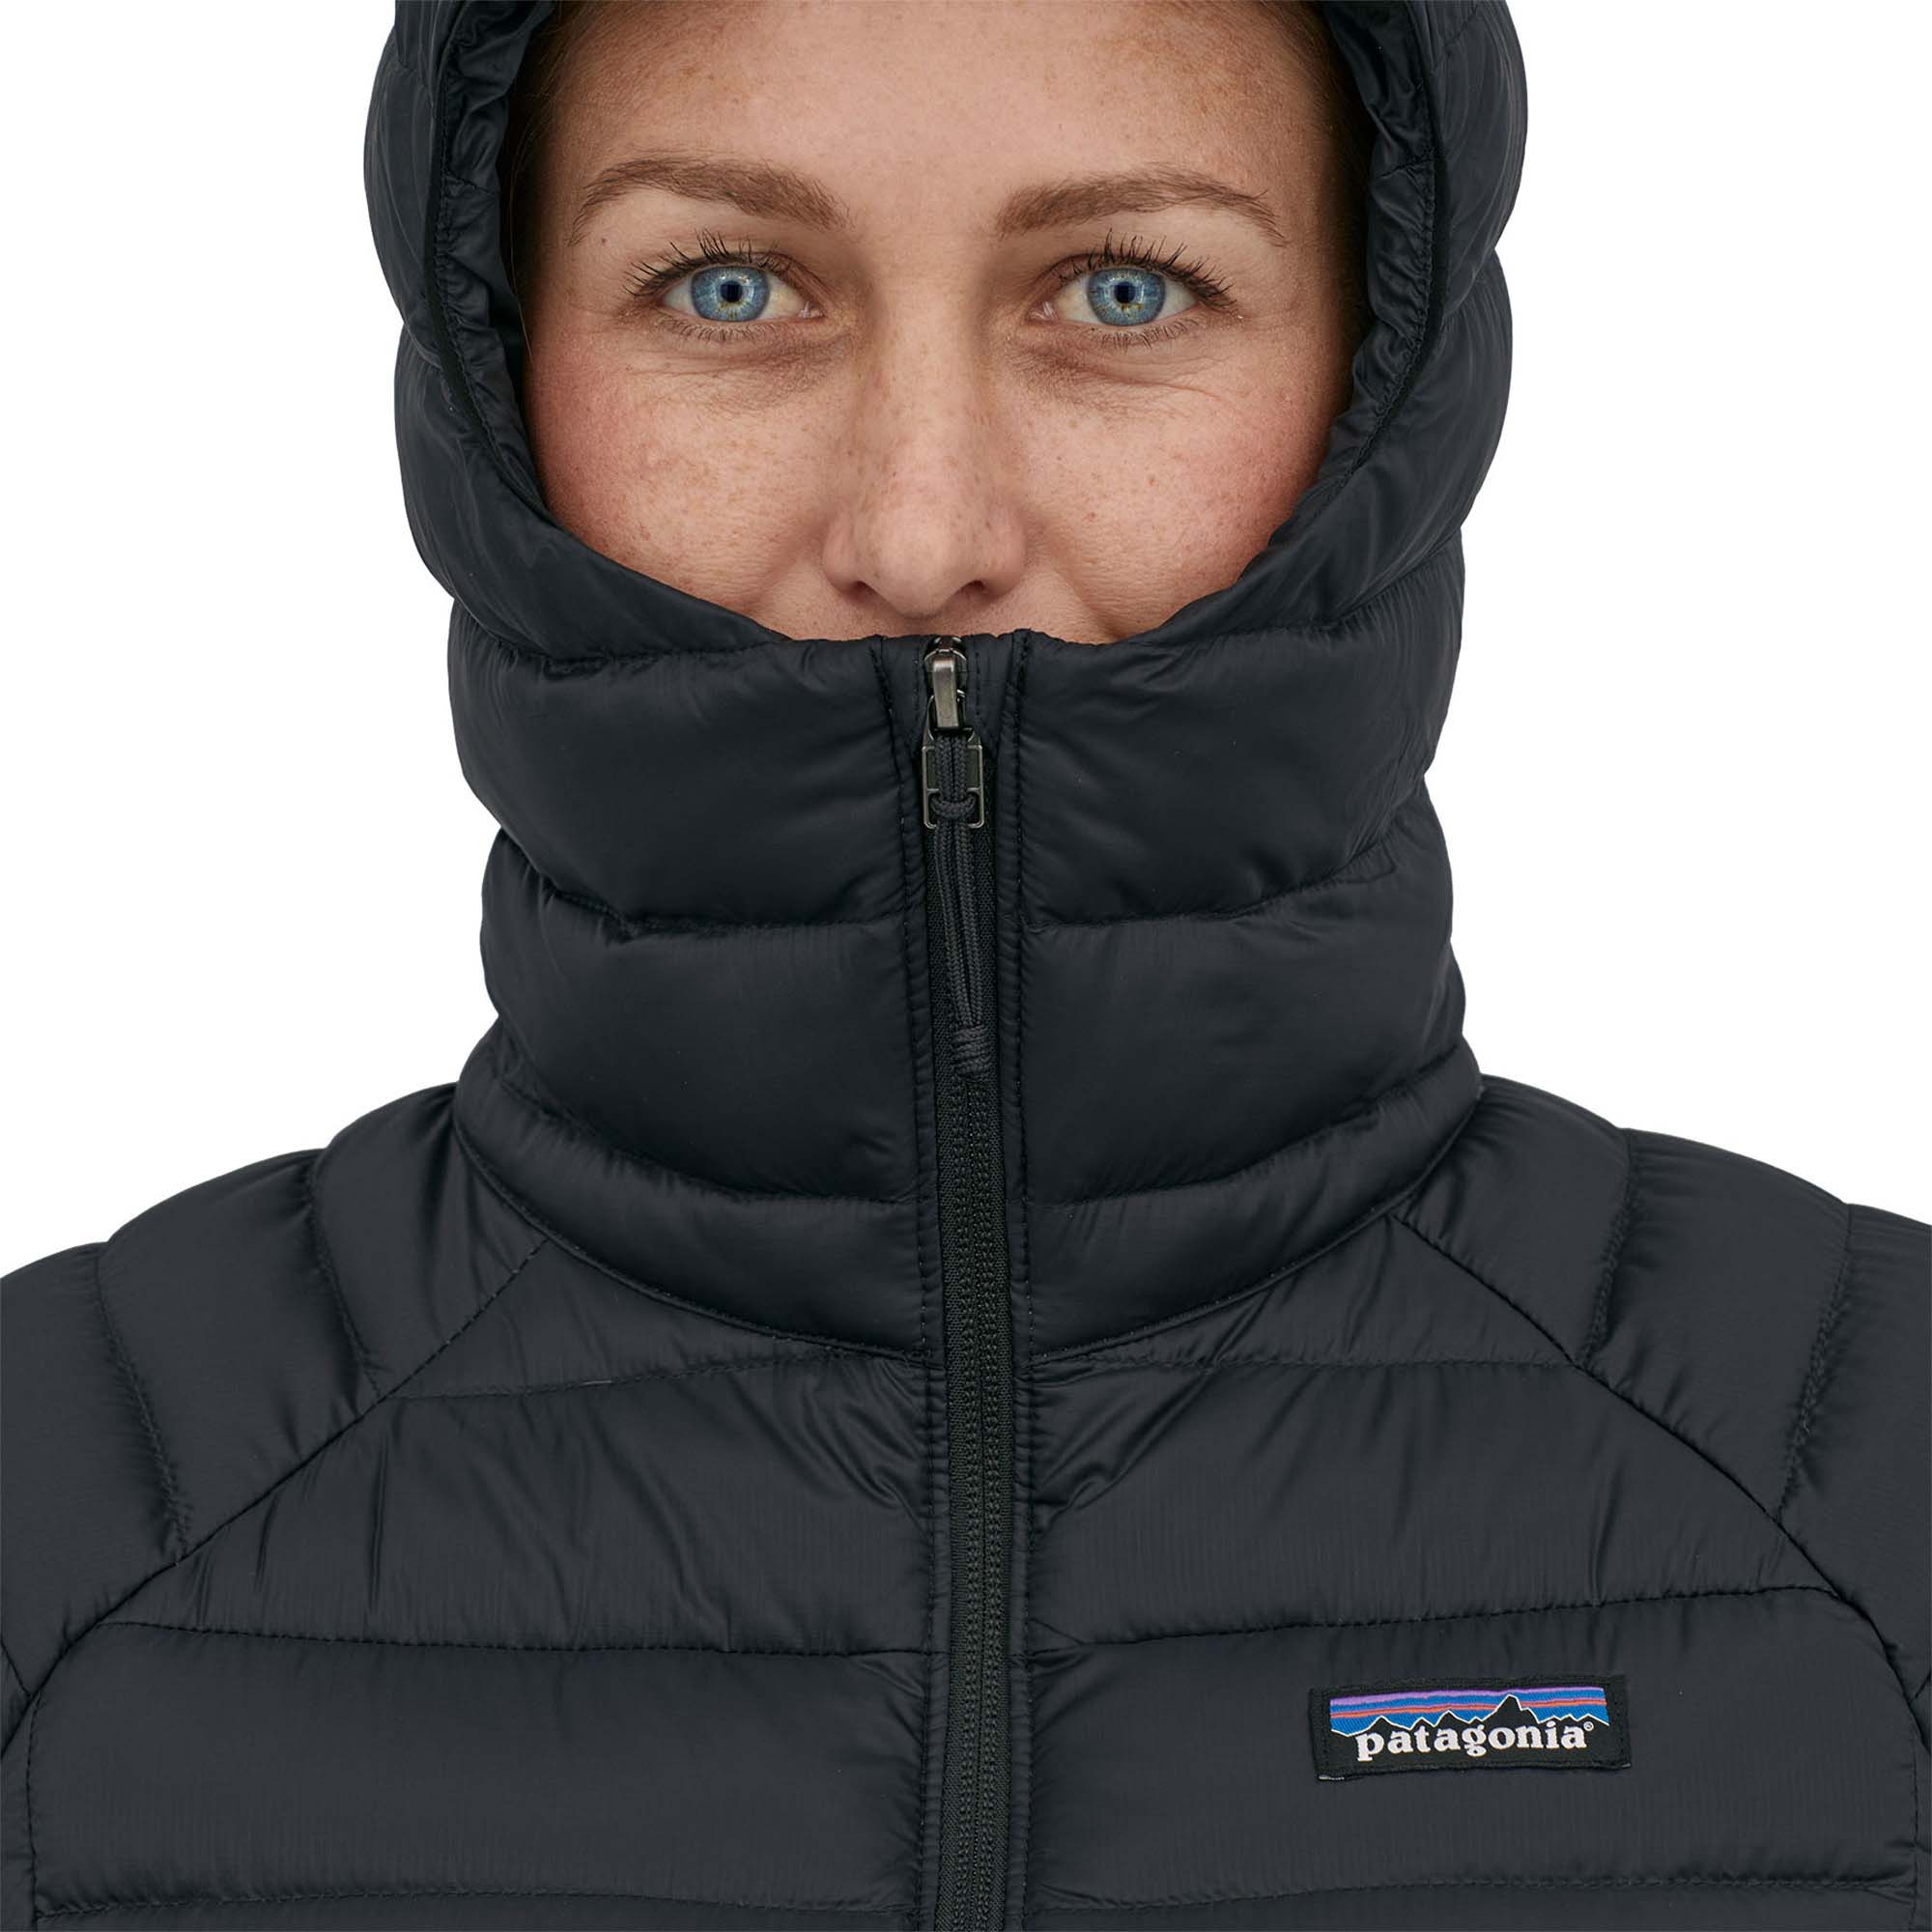 Patagonia Down Sweater Hoody Women's Insulated Jacket